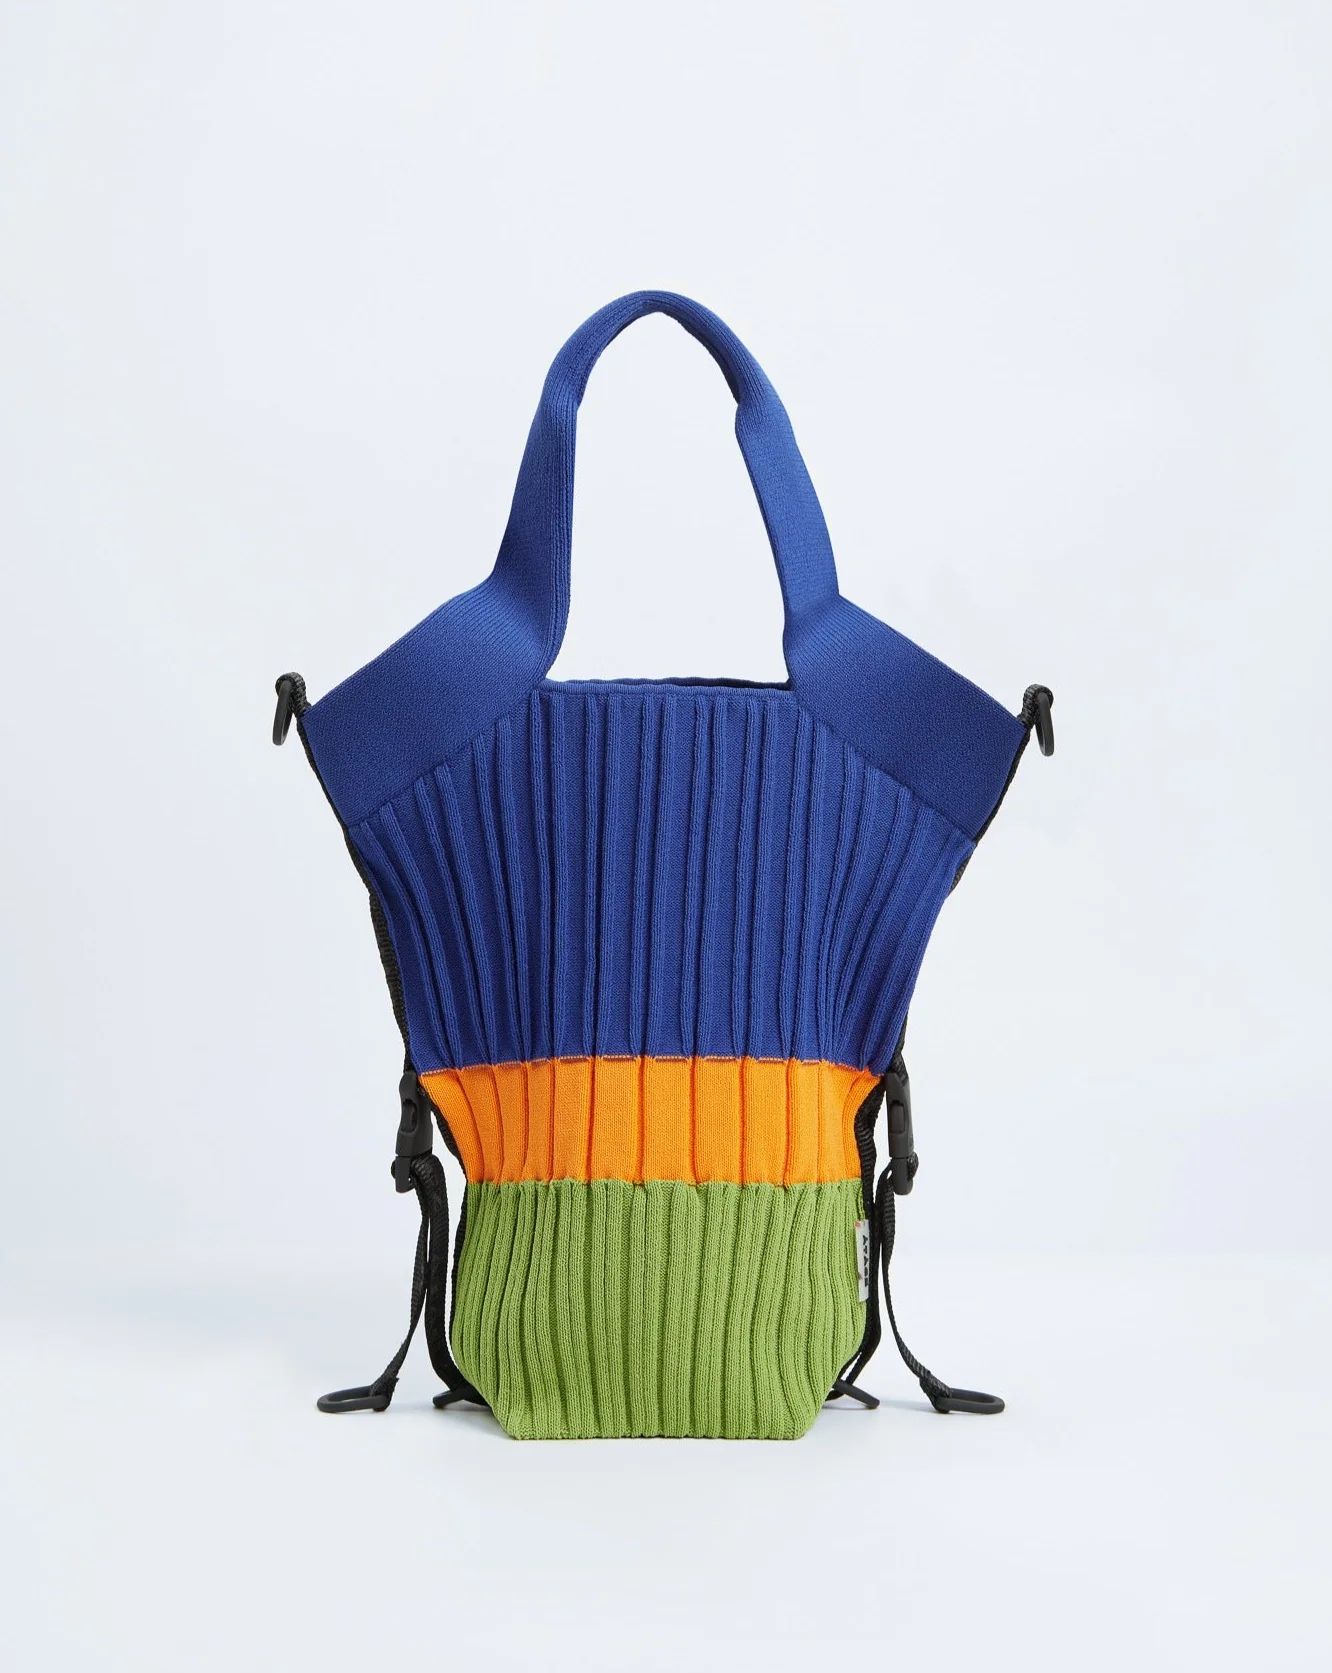 Sustainably Chic: Atacz Knit Handbags, Ethically Designed and Crafted from Recycled PET Bottles | Atacz (US)